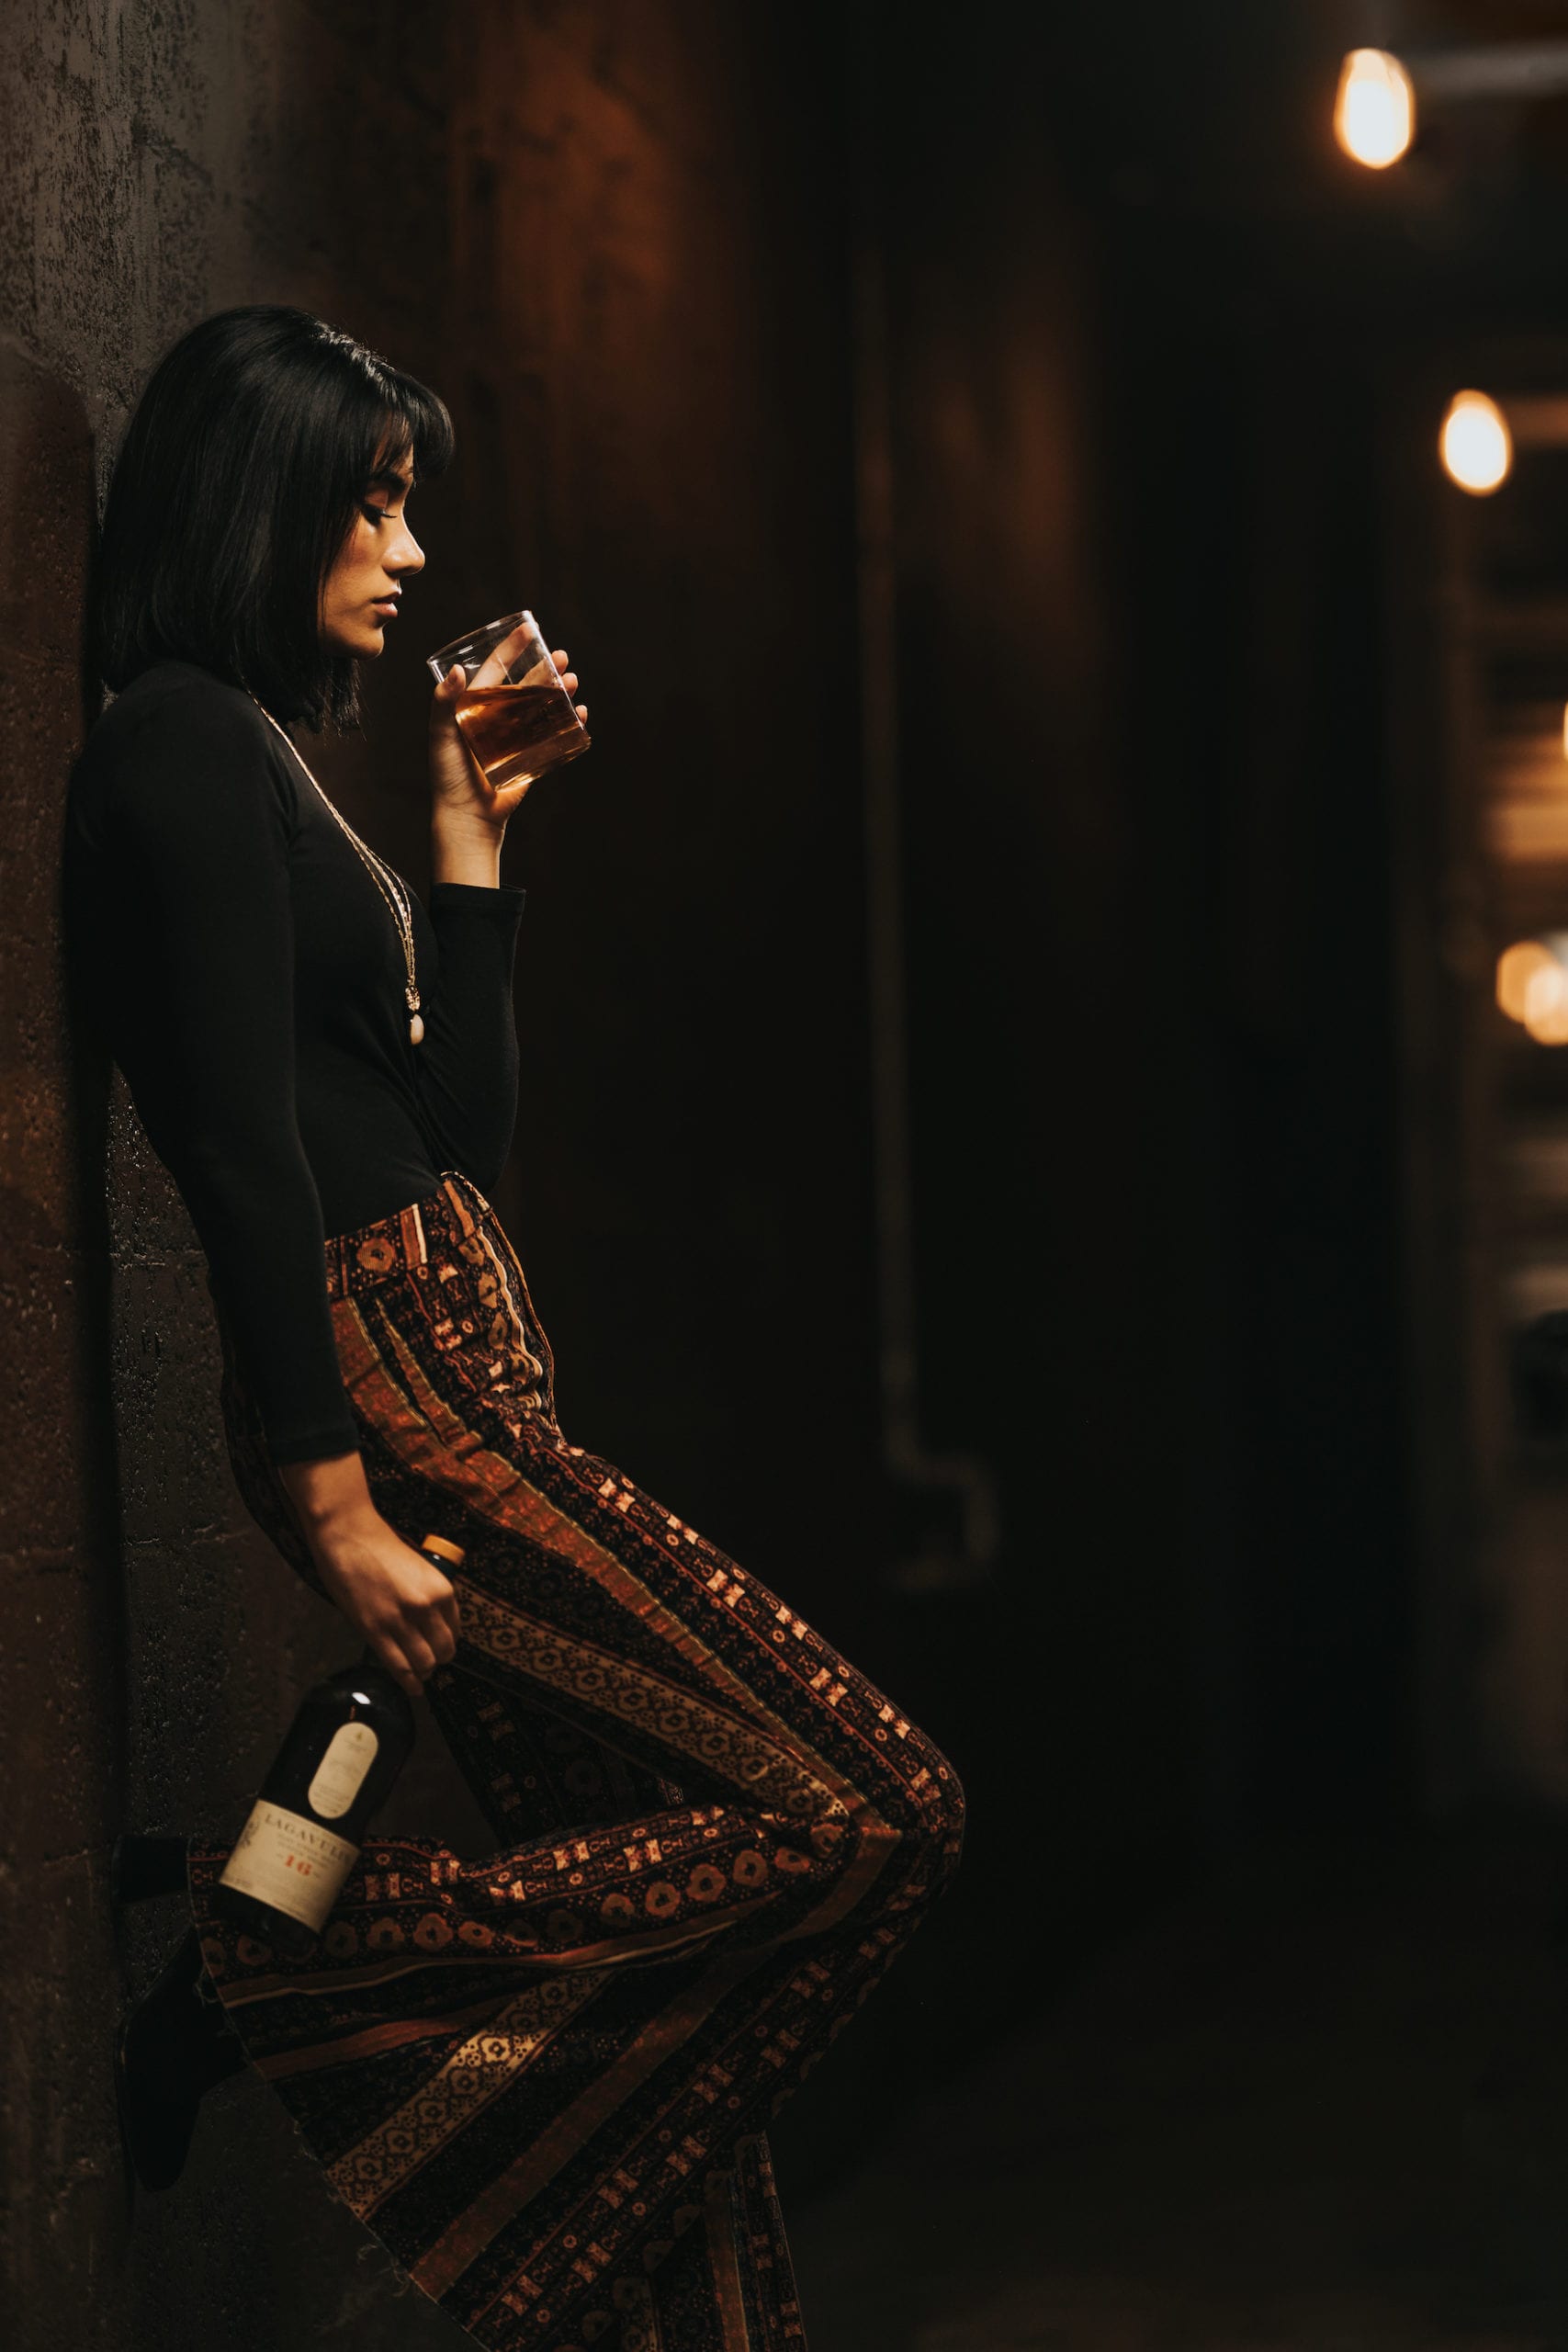 Next Door Rebranding and hospitality photoshoot Side profile of woman posing for camera with short black hair wearing black turtleneck and patterned pants leaning against the wall holding a glass drink in one hand and an bottle of alcohol in the other